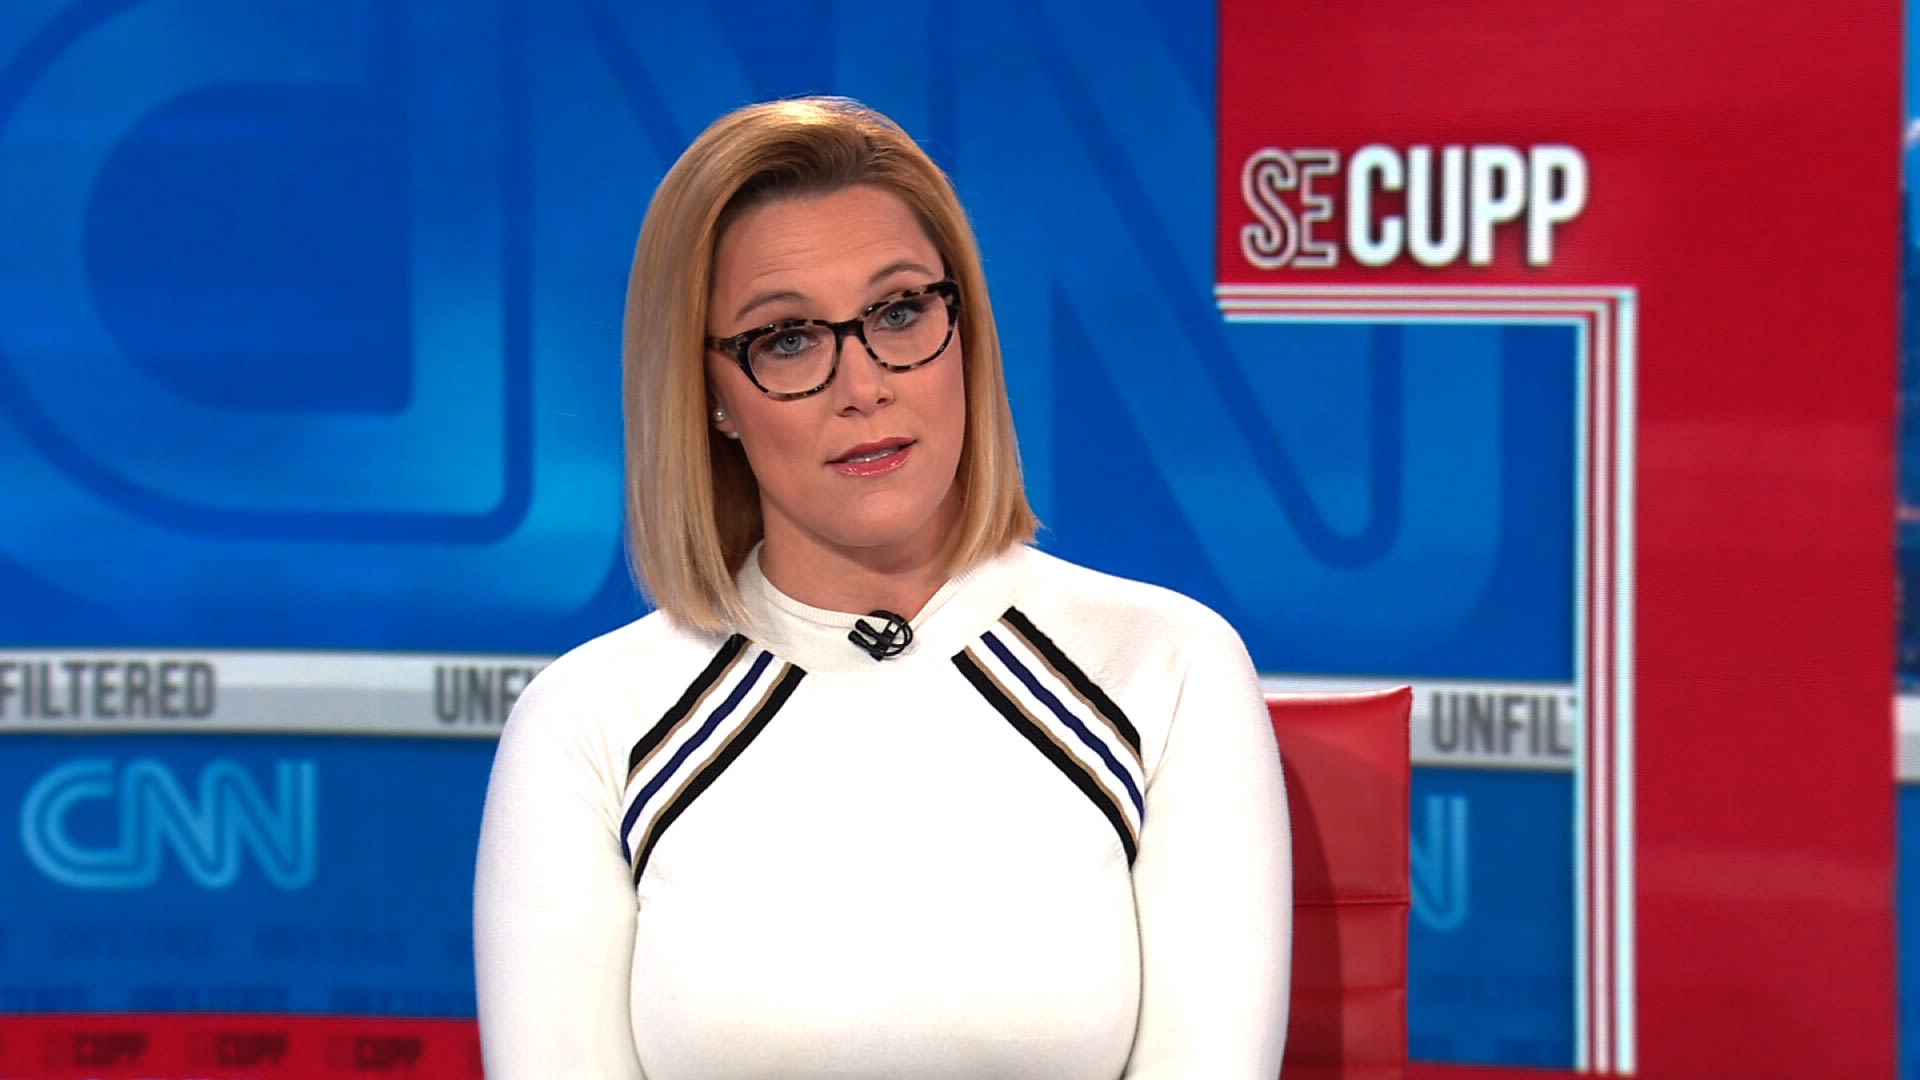 S.E. Cupp: What's the point of debates anymore?